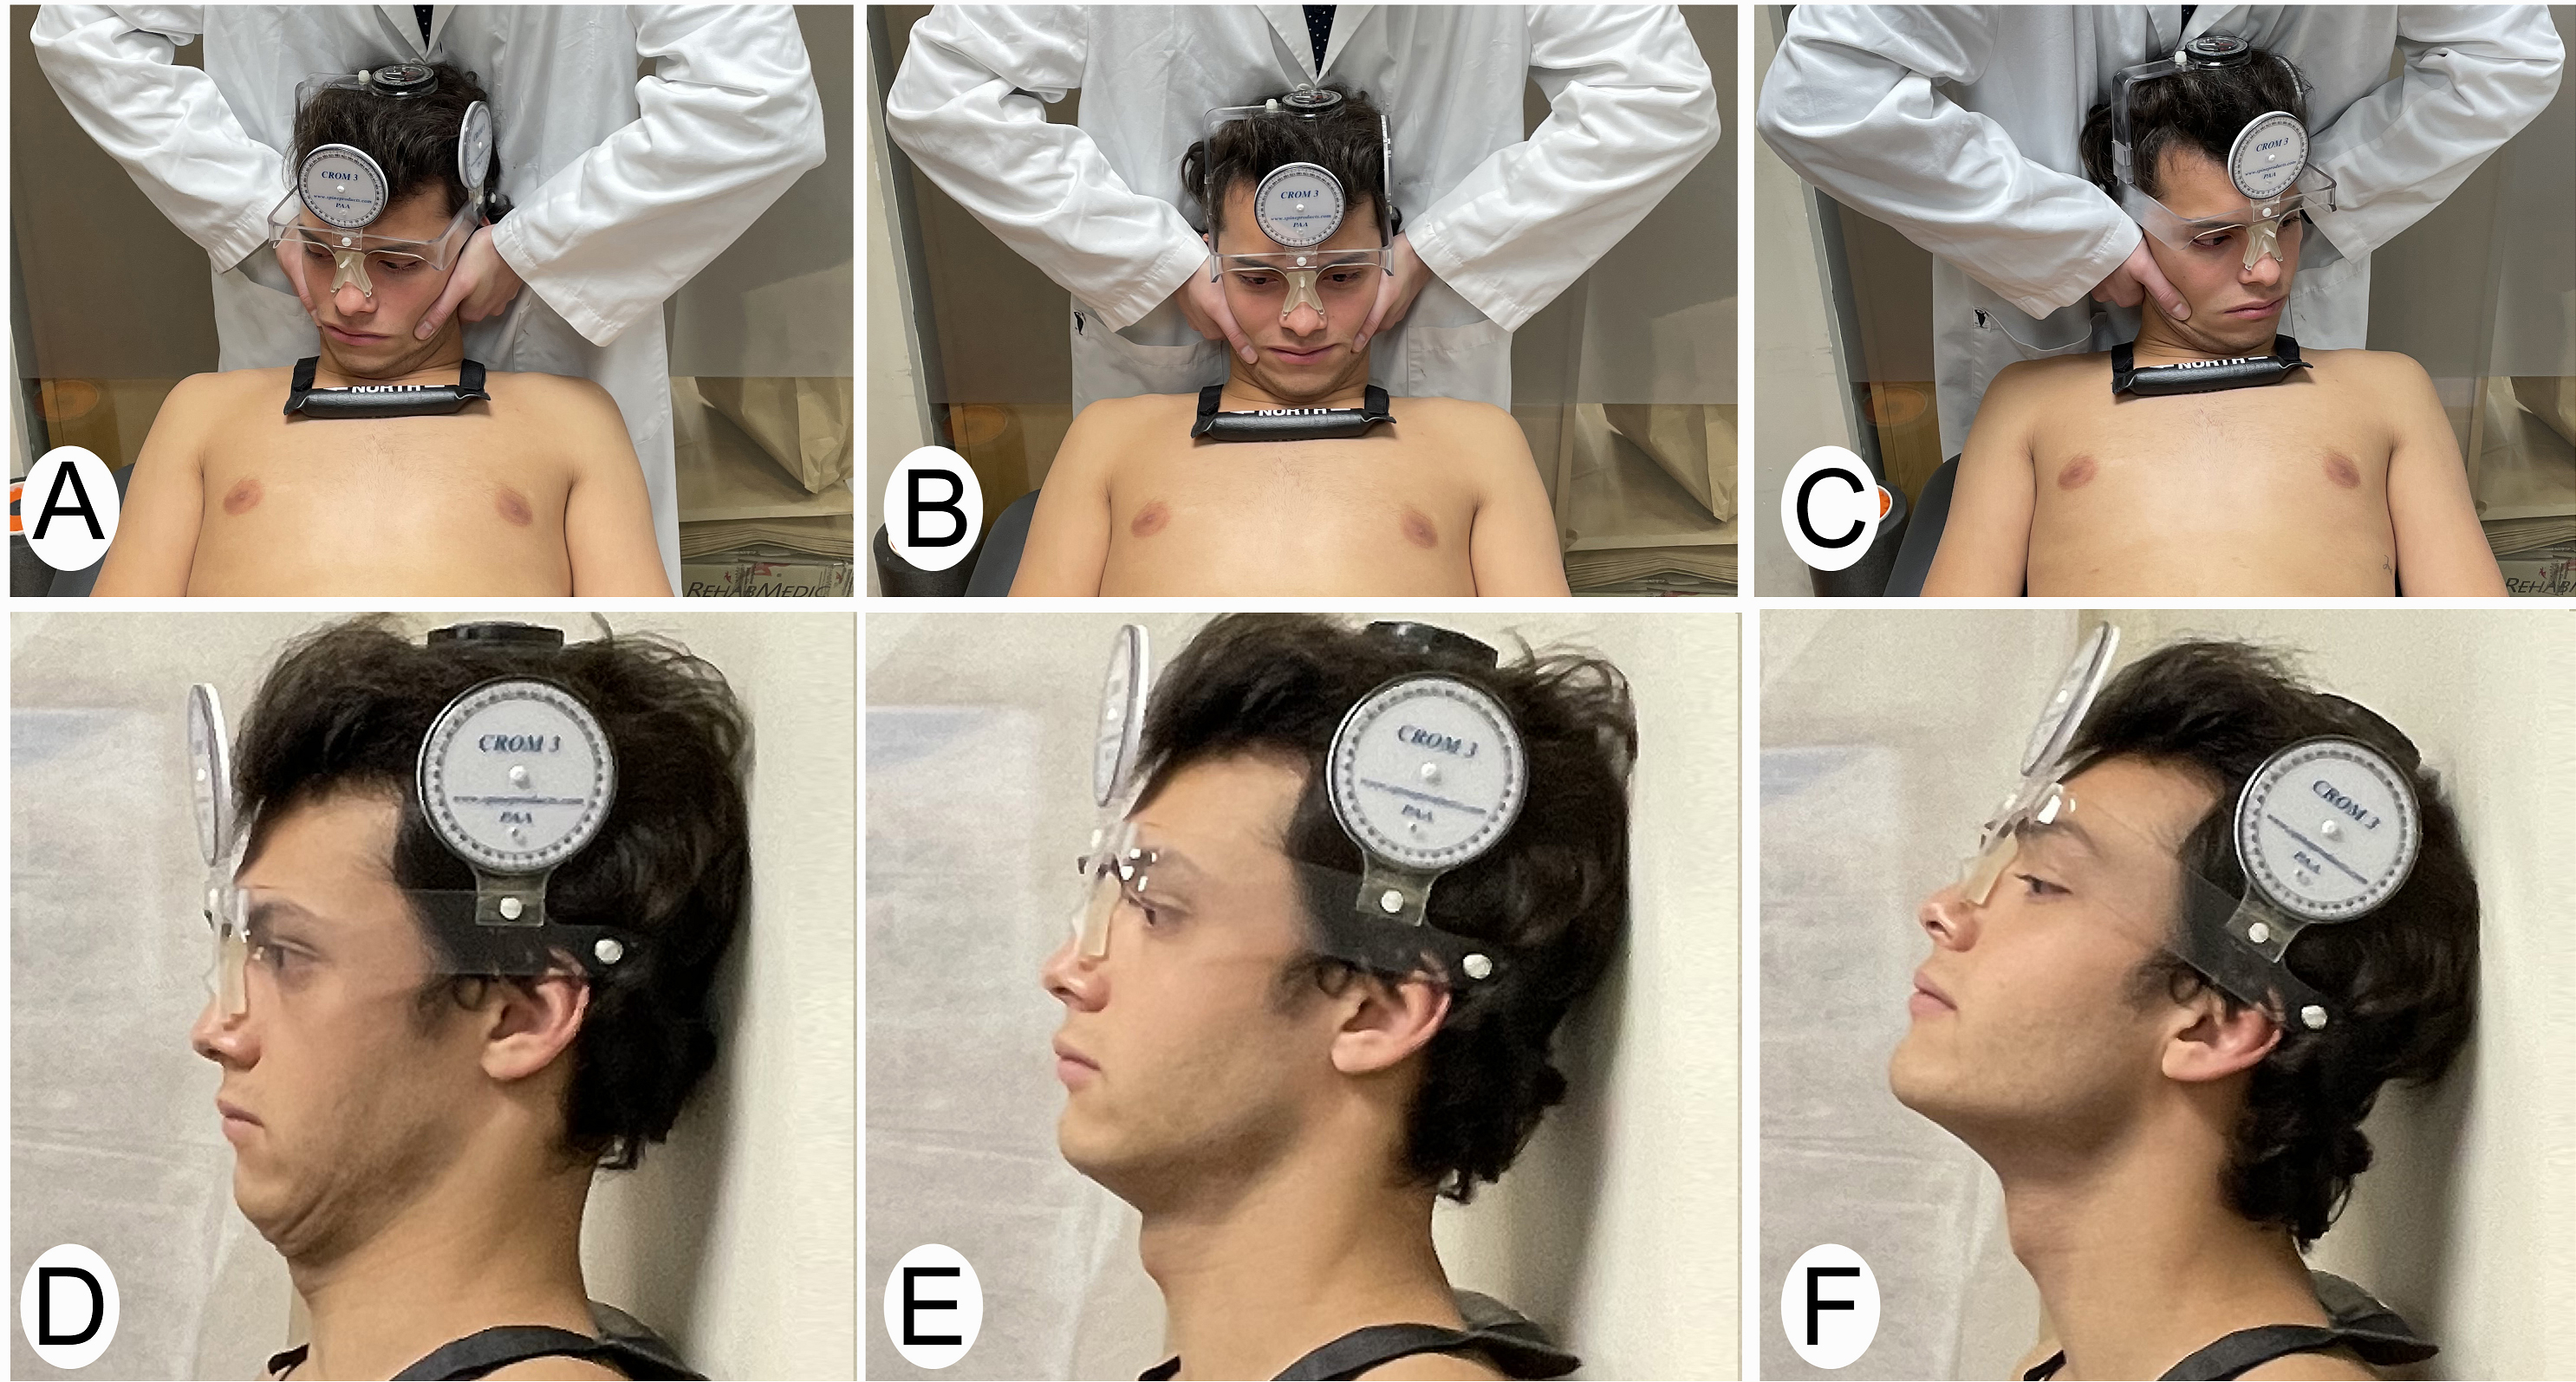 A, B, C) Sequence of flexion-rotation test to determine the most restricted side. A) Right rotation. B) Neutral position. C) Left rotation. D) Upper flexion movement. E) Neutral position. F) Upper extension movement.